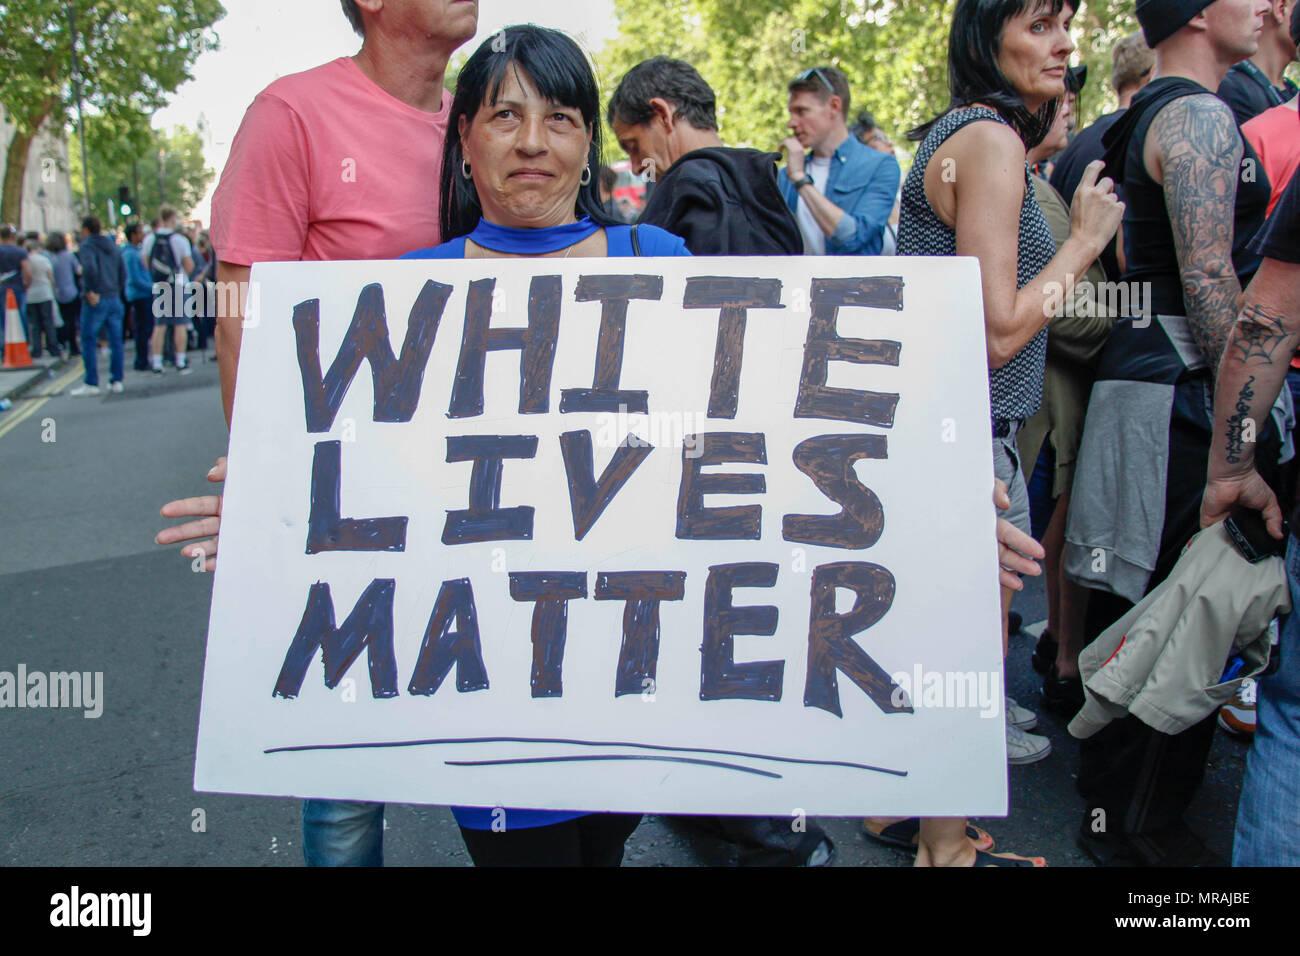 London, UK, 26 May 2018. A White Lives Matter protester at the demonstration to free Tommy Robinson Credit: Alex Cavendish/Alamy Live News Stock Photo